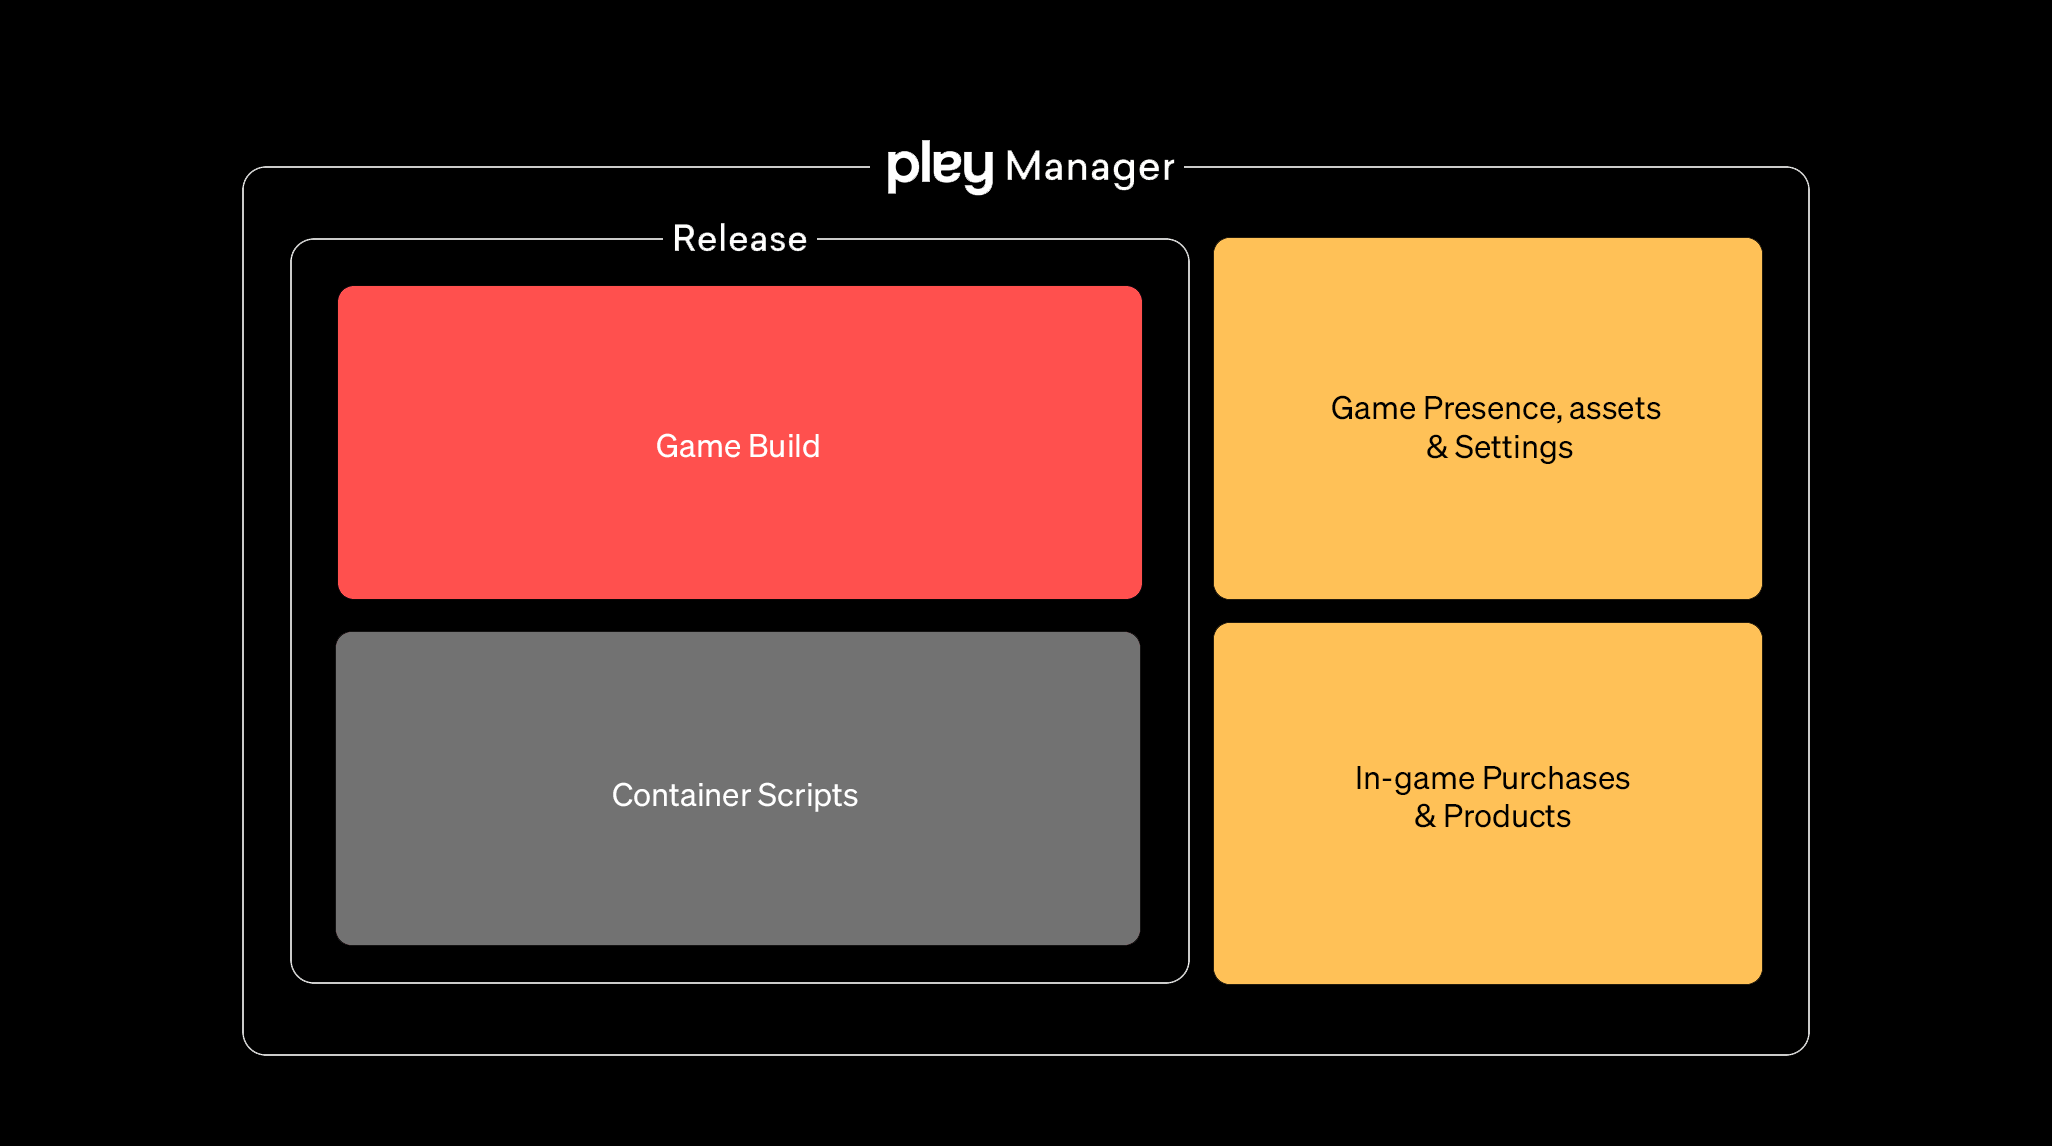 Pley's Game Manager is a web-based dashboard that lets you upload, manage, and host your game. Within the manager you can easily make releases, configure IAPs, and game visuals.